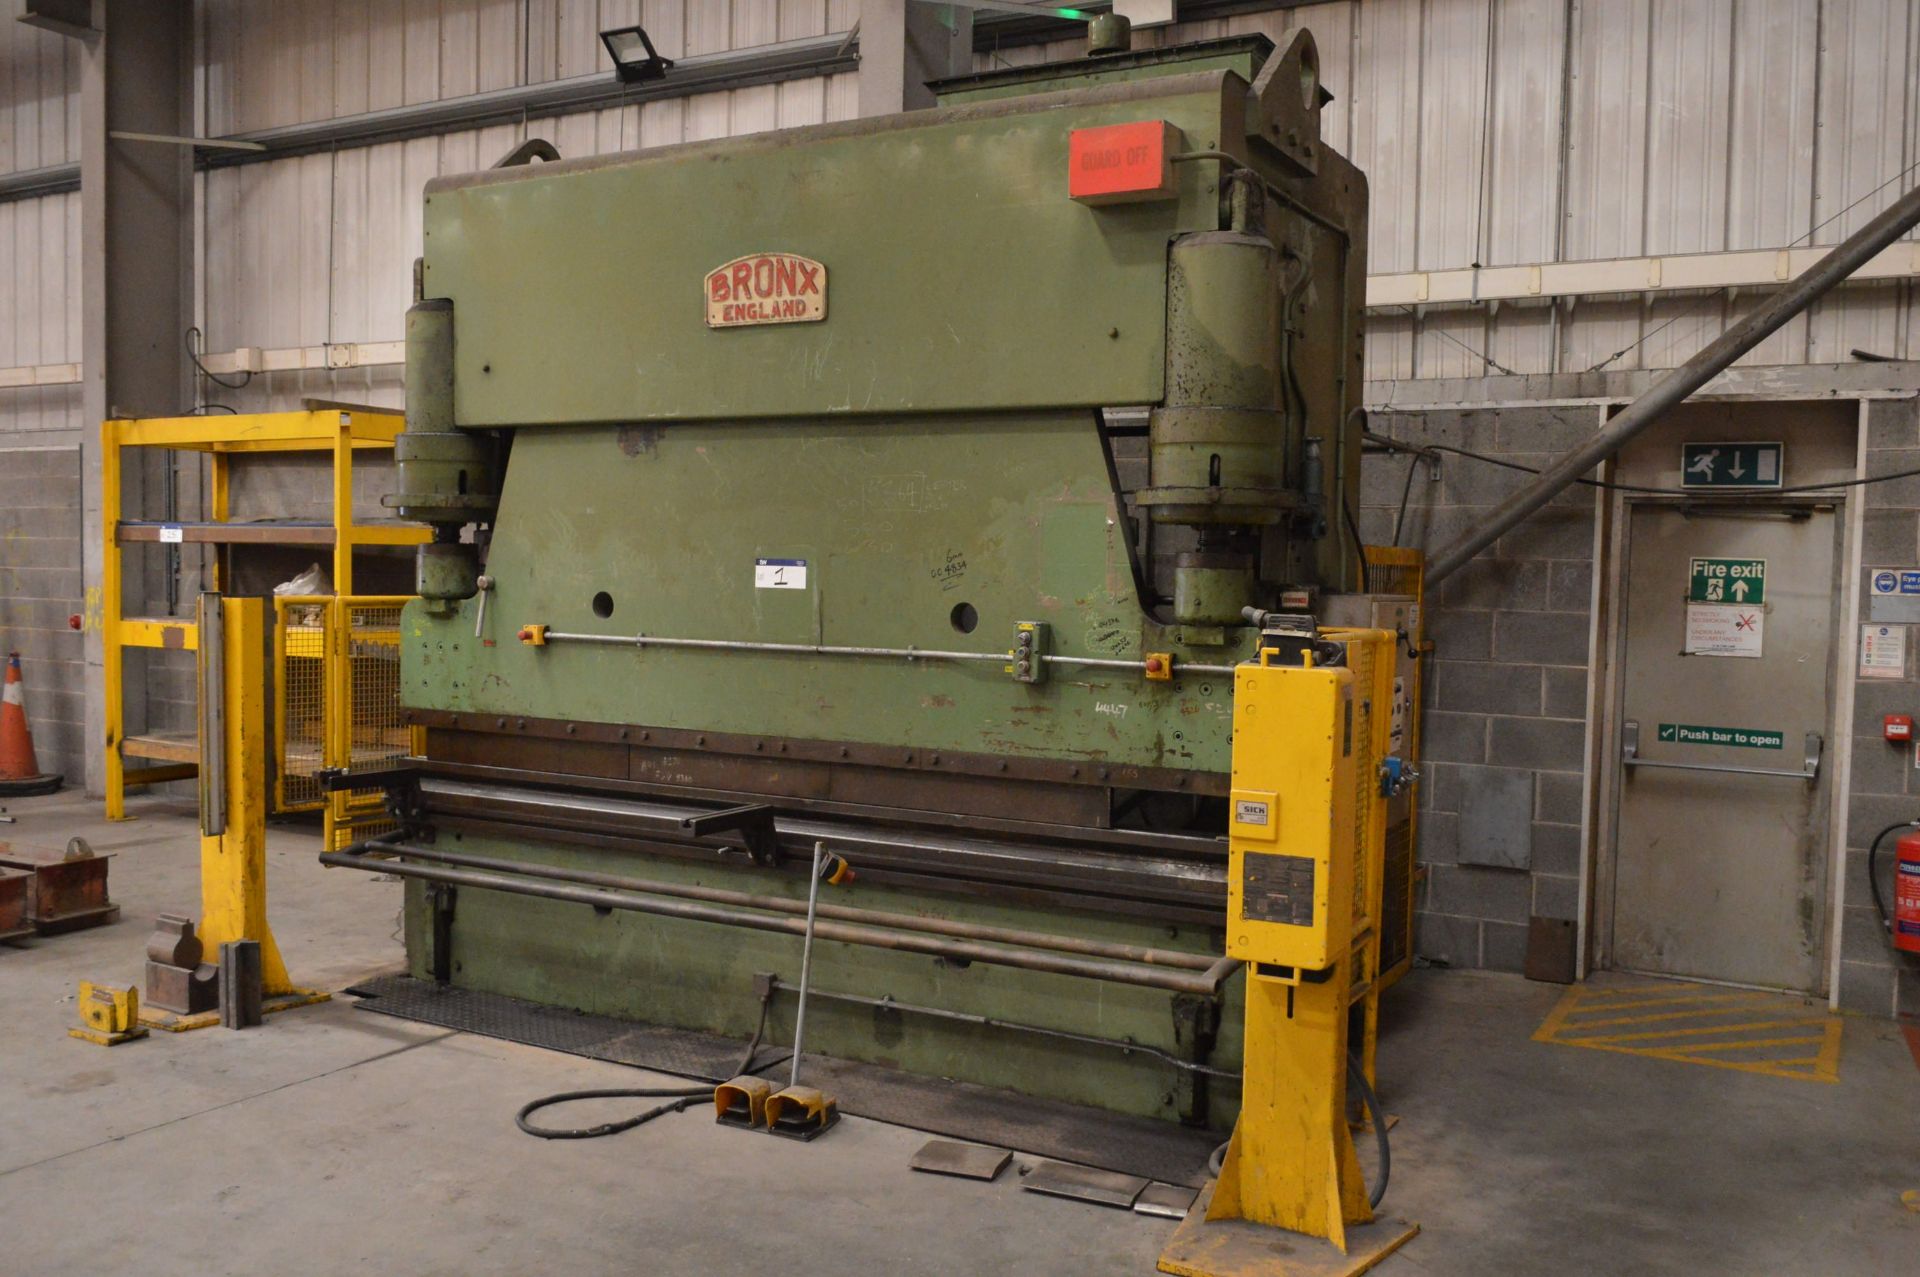 Bronx 200.220.10.H 160 tonne HYDRAULIC PRESS BRAKE, serial no. 30675, 12ft wide, with Sick infra-red - Image 2 of 8